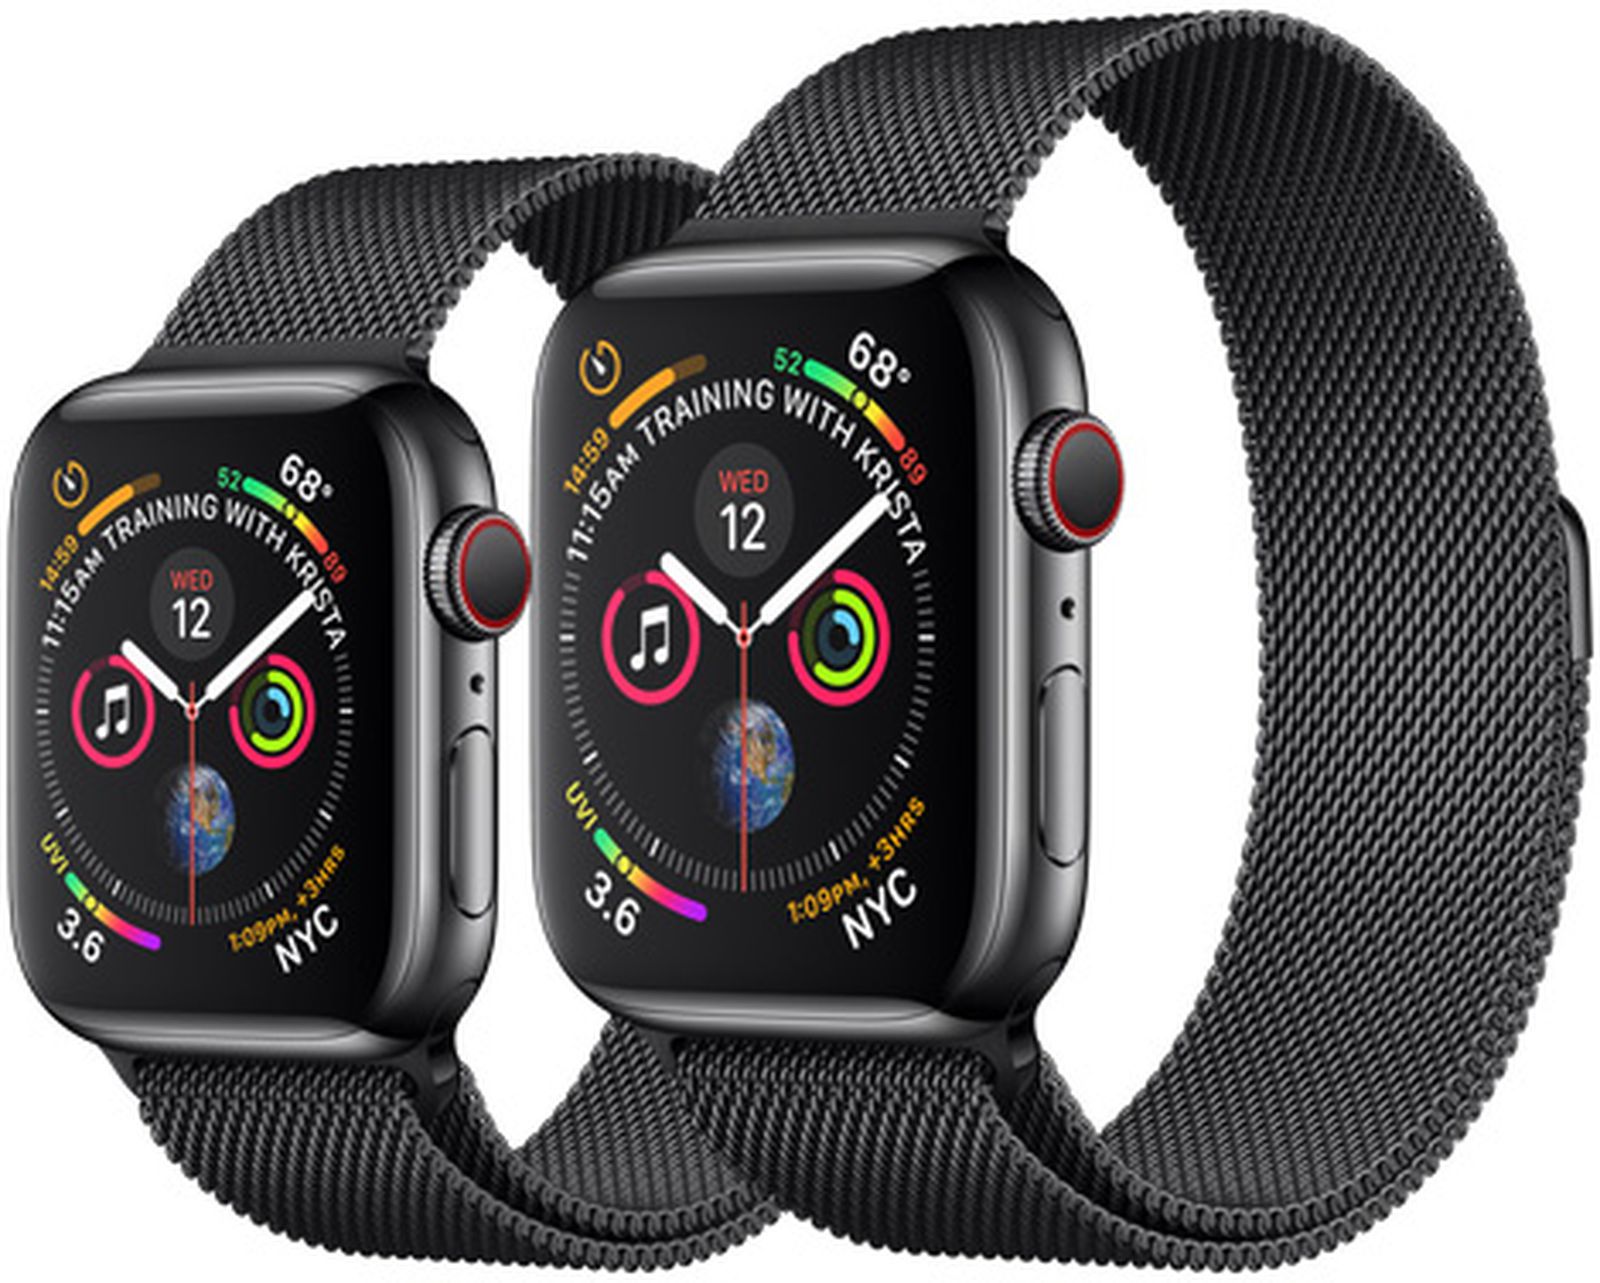 Is an Apple Watch with LTE Worth the Investment? 11